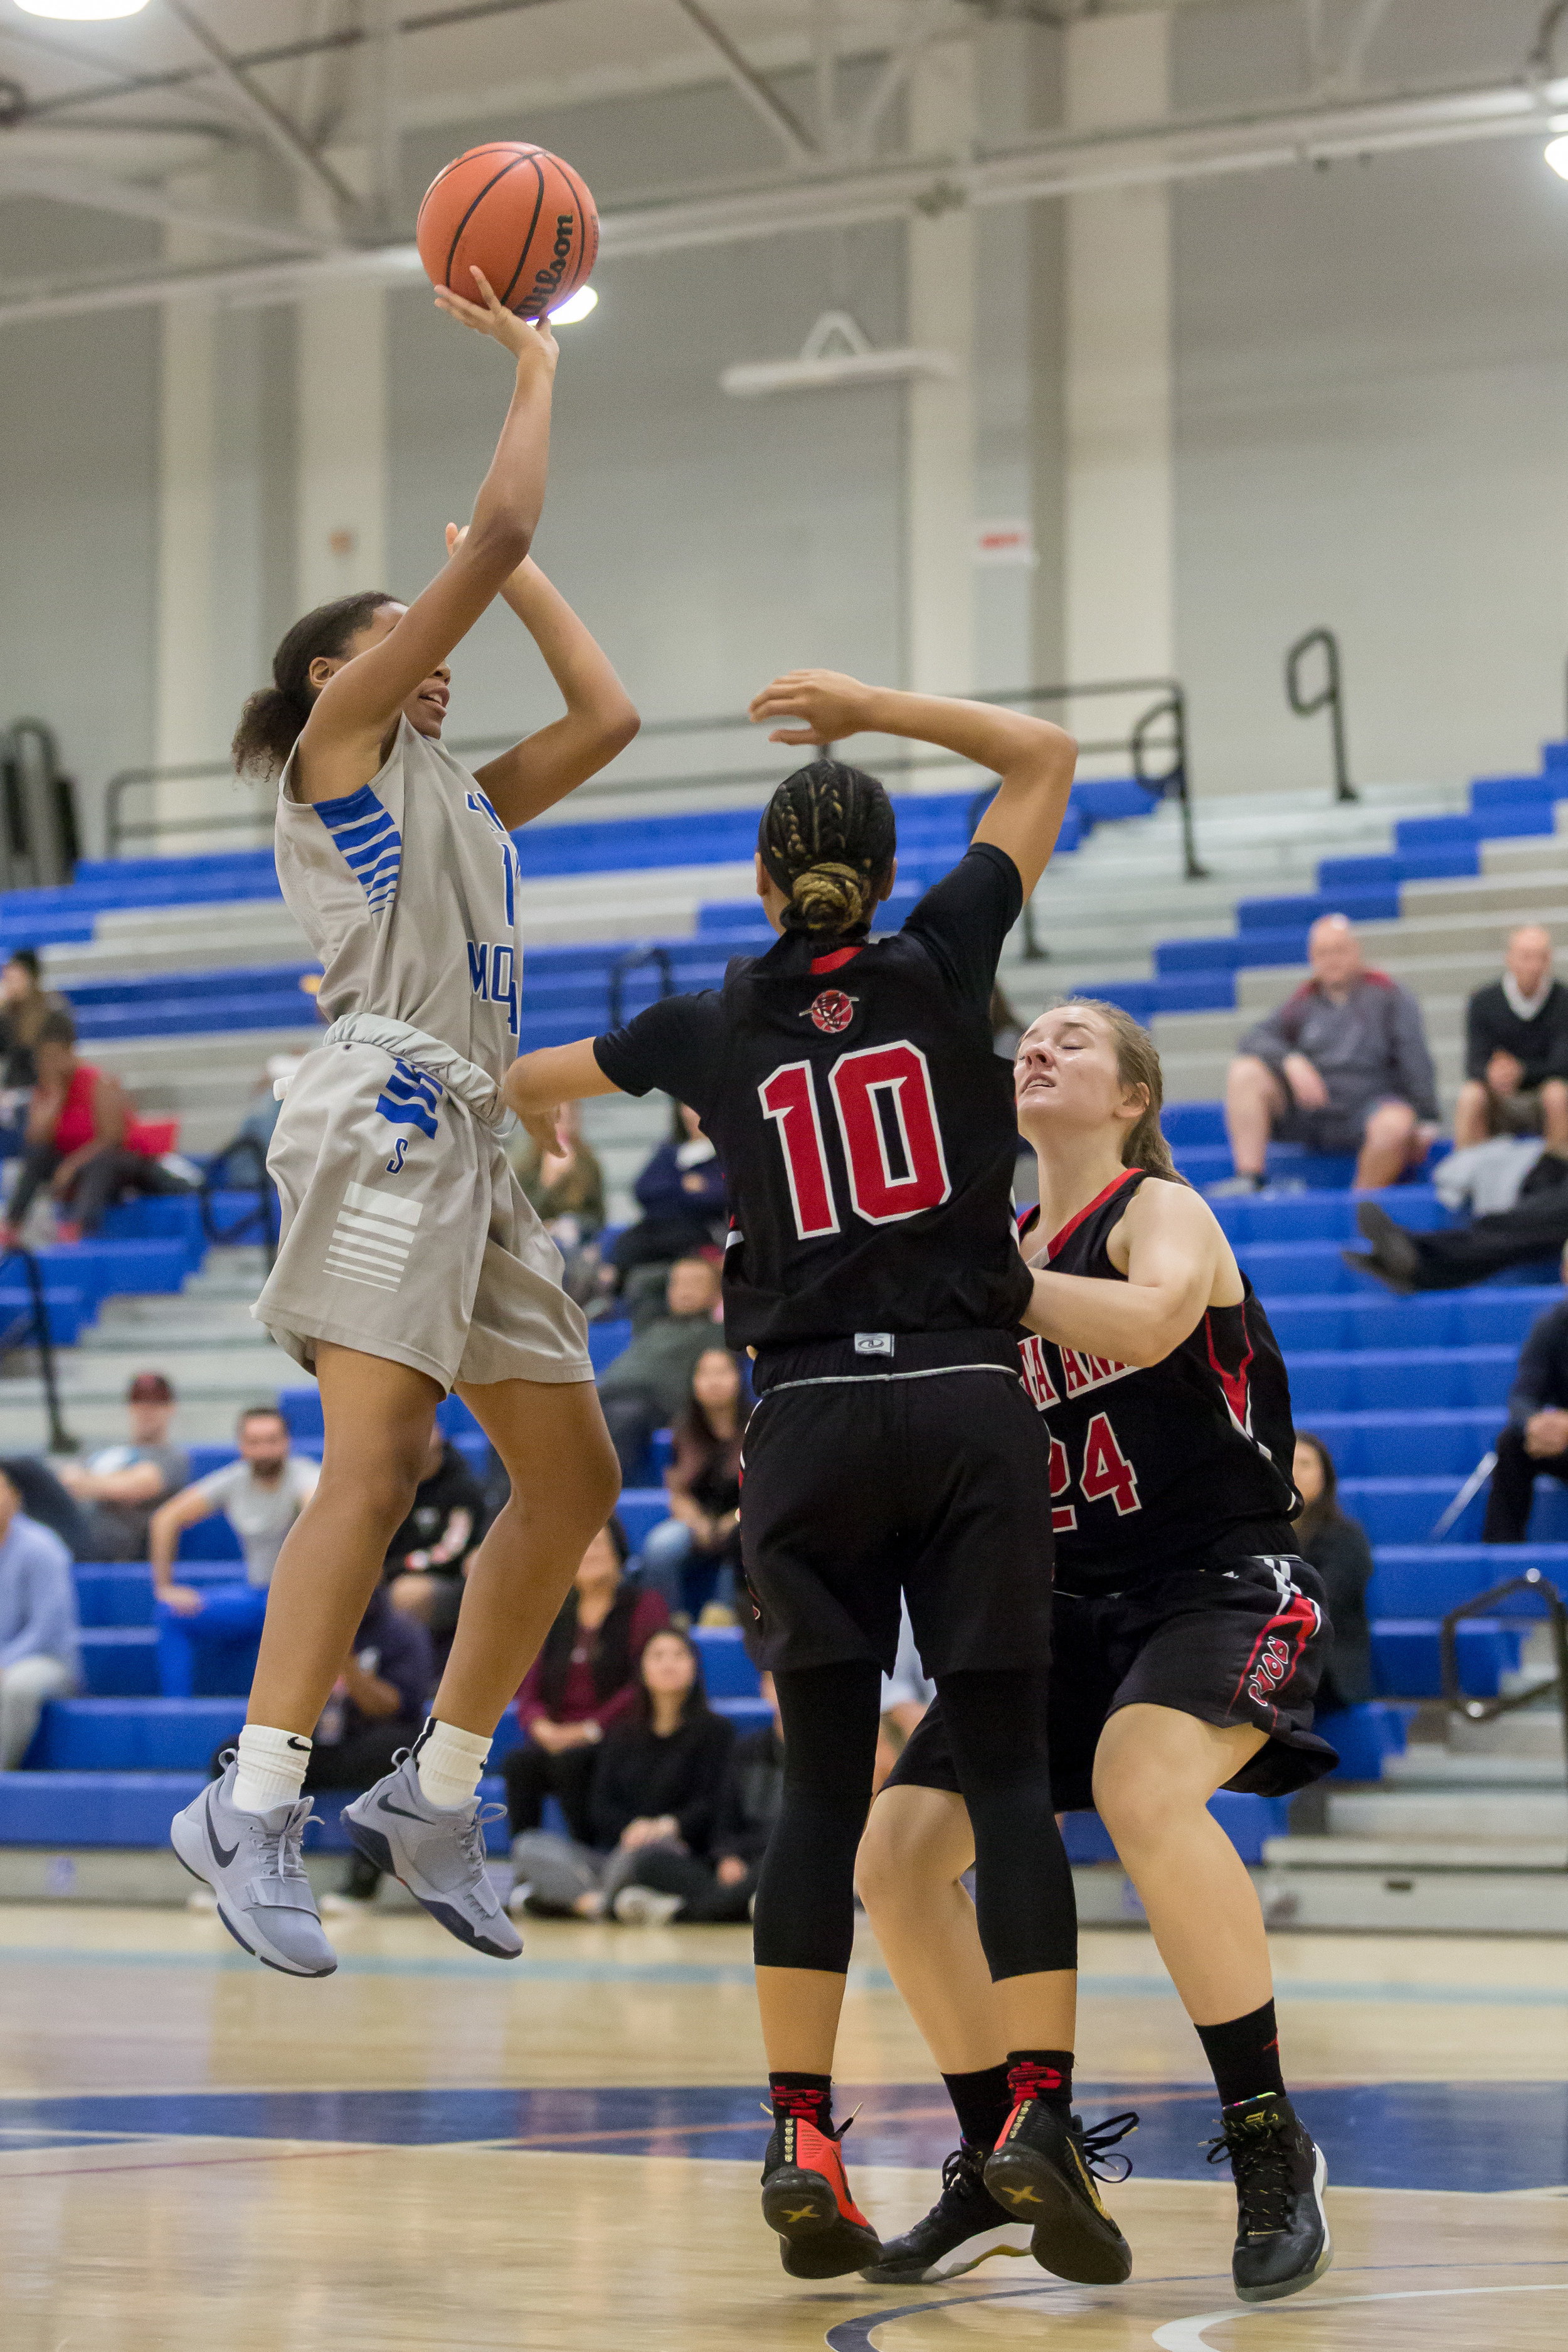  Forward Jazzmin Oddie (12) of Santa Monica College shoots a floater over  Guard Candace Black (10) and Guard Alexis Smith (24) of Santa Ana College. Santa Monica College Corsairs win the game 63-54 against Santa Ana College. On Saturday, November 4t